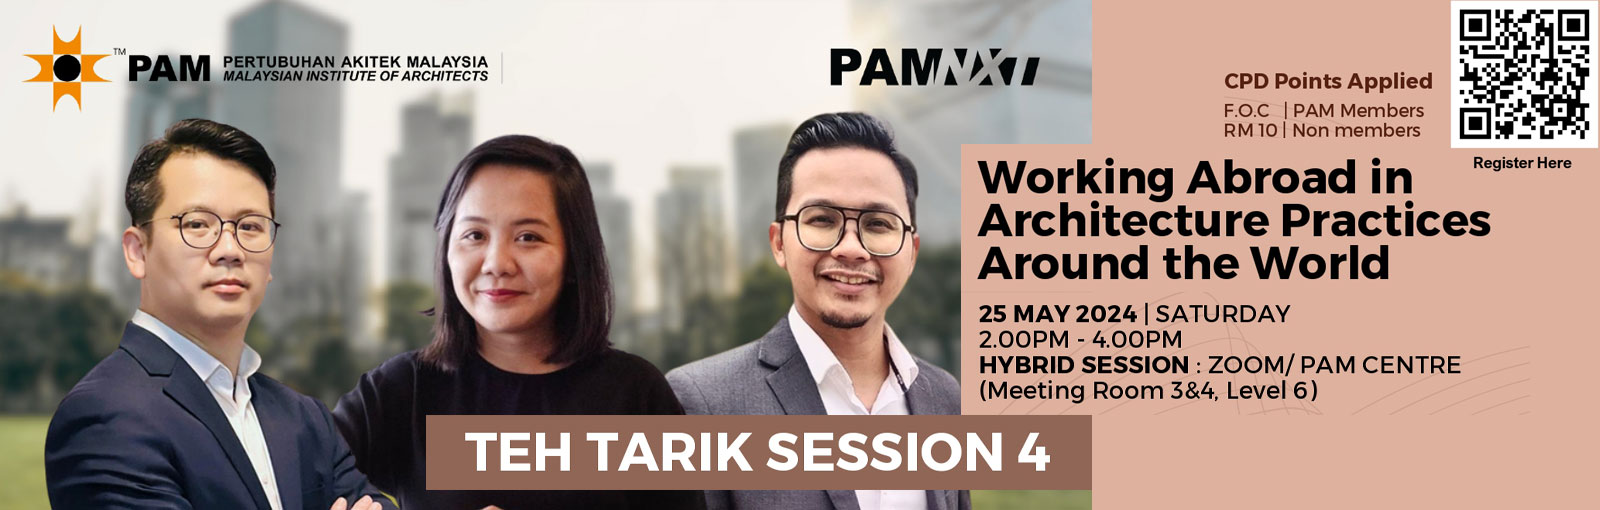 Teh Tarik Session 4: Working Abroad in Architecture Practices Around the World